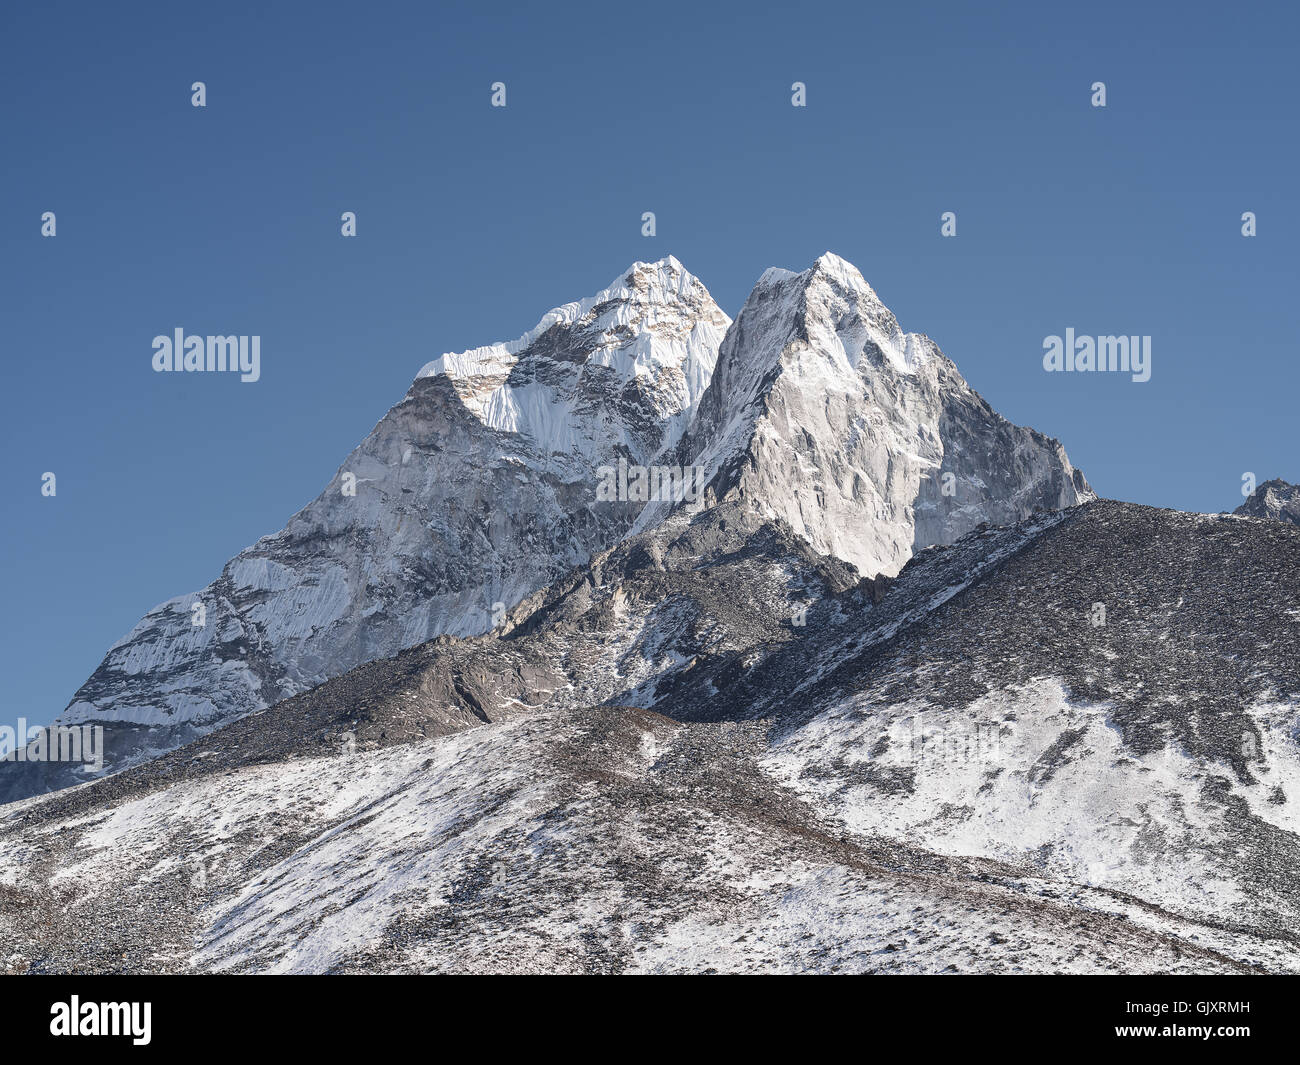 Jagged peak of the Himalaya Mountains in Nepal's Everest Base Camp Stock Photo